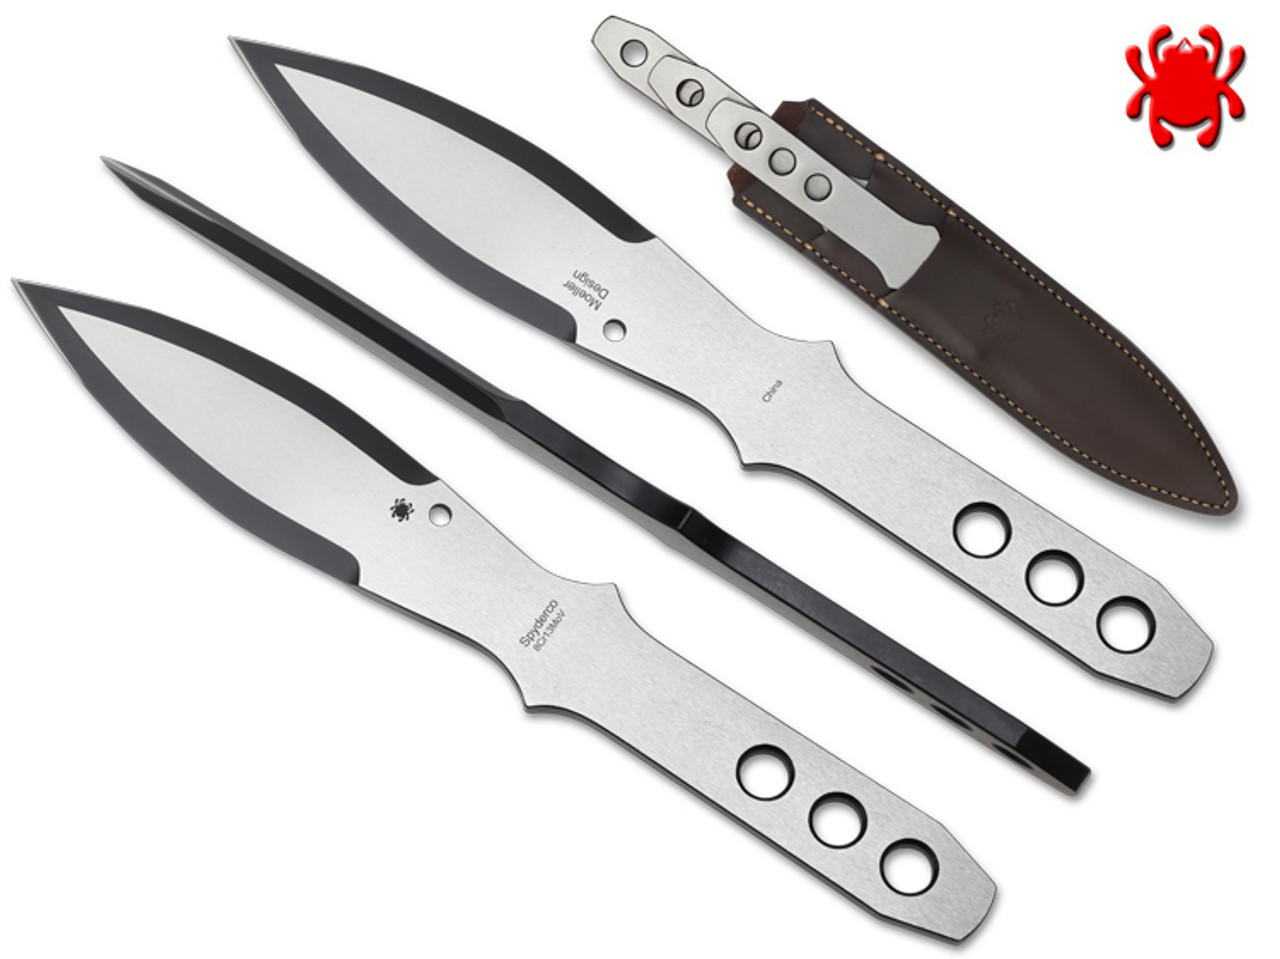 10 Best Throwing Knives of 2021 - HiConsumption